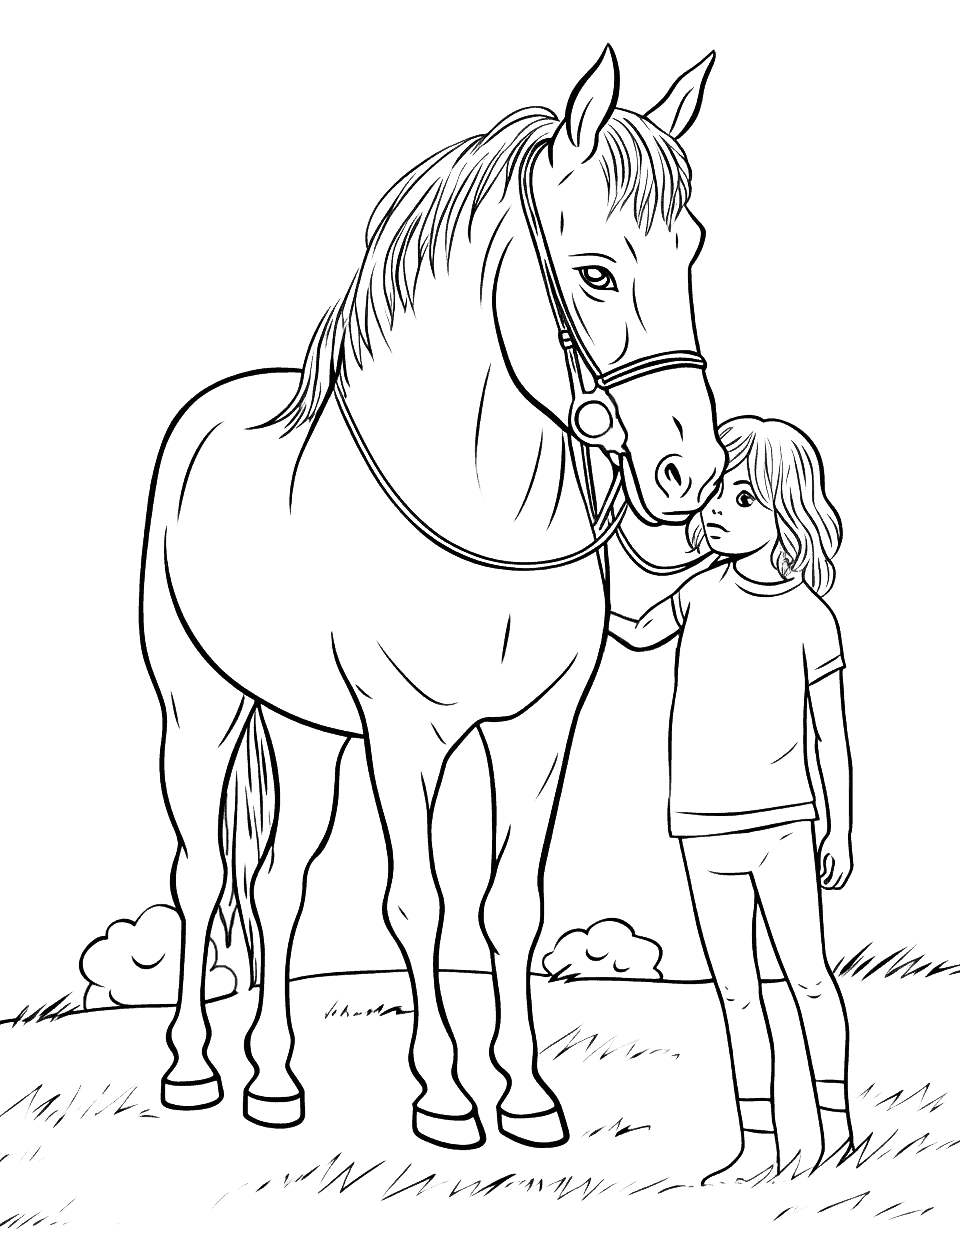 Girl and Her Best Friend Coloring Page - A girl and her horse sharing a moment of affection.